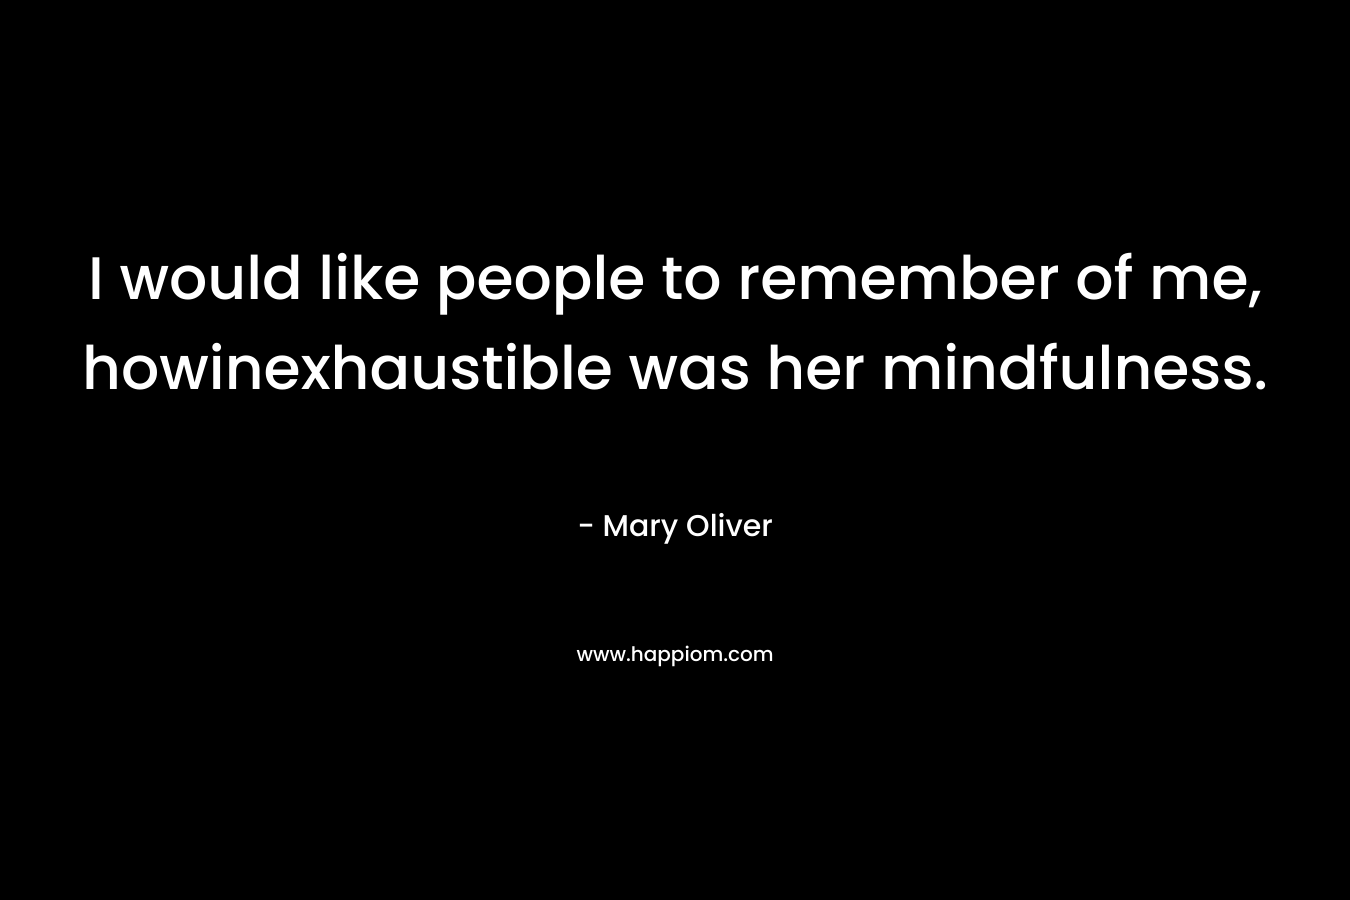 I would like people to remember of me, howinexhaustible was her mindfulness. – Mary Oliver